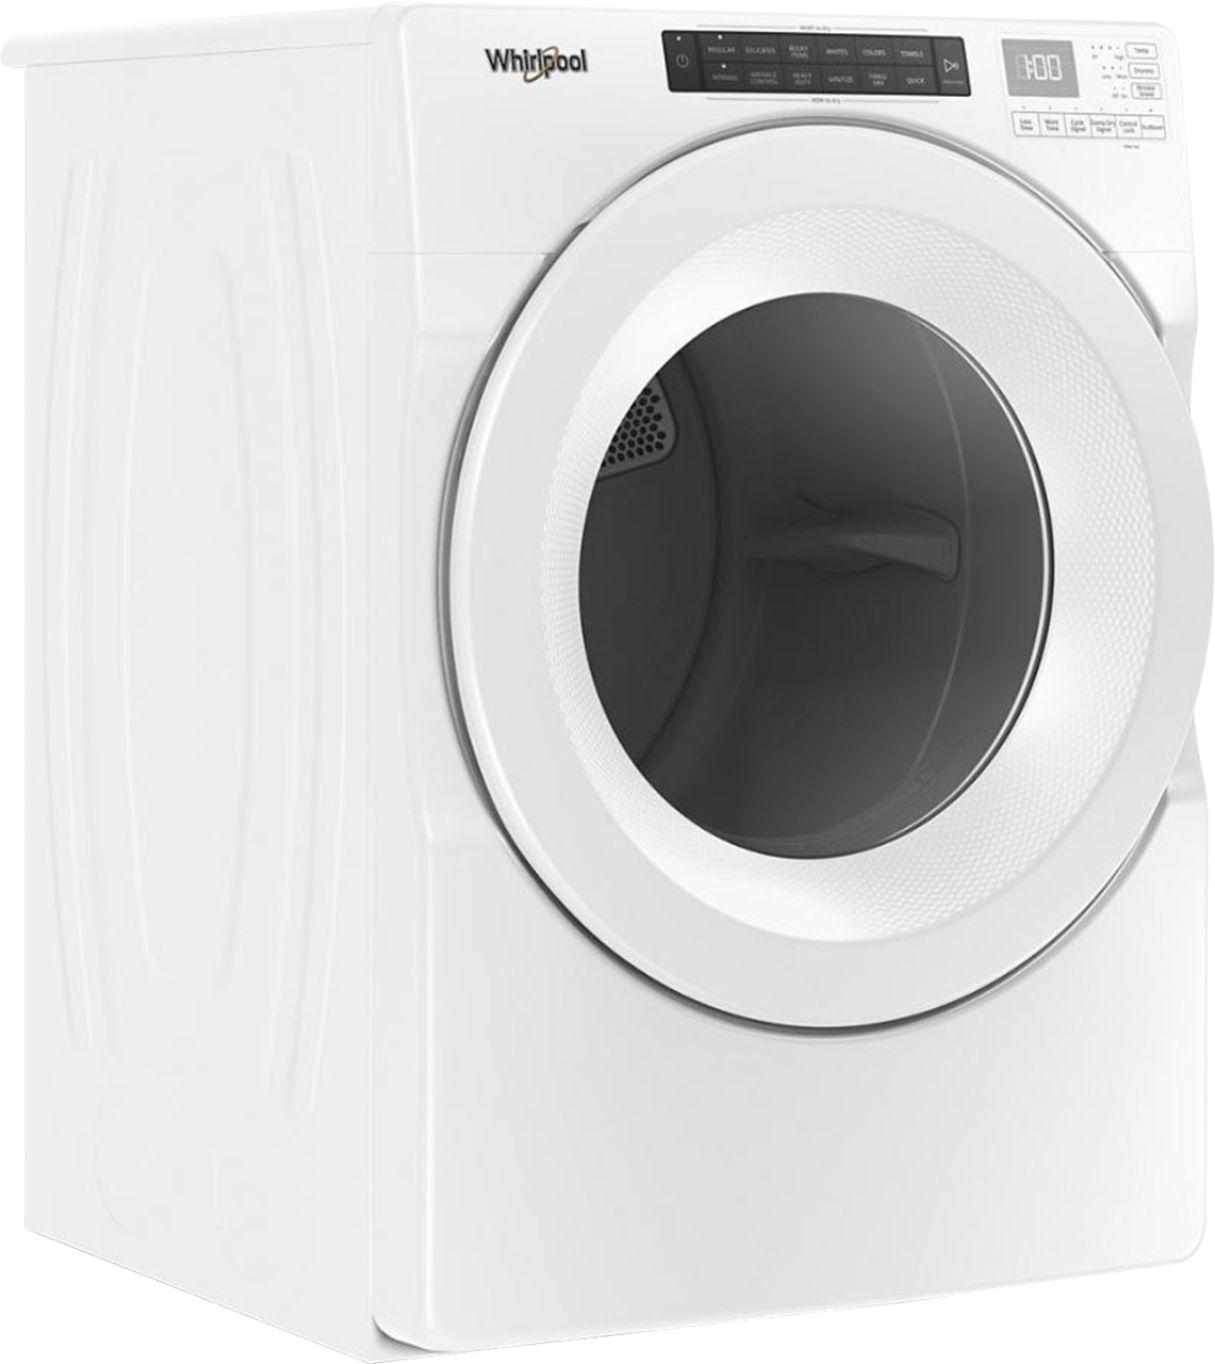 Angle View: GE - 7.8 Cu. Ft. 12-Cycle Gas Dryer with Steam - Diamond gray